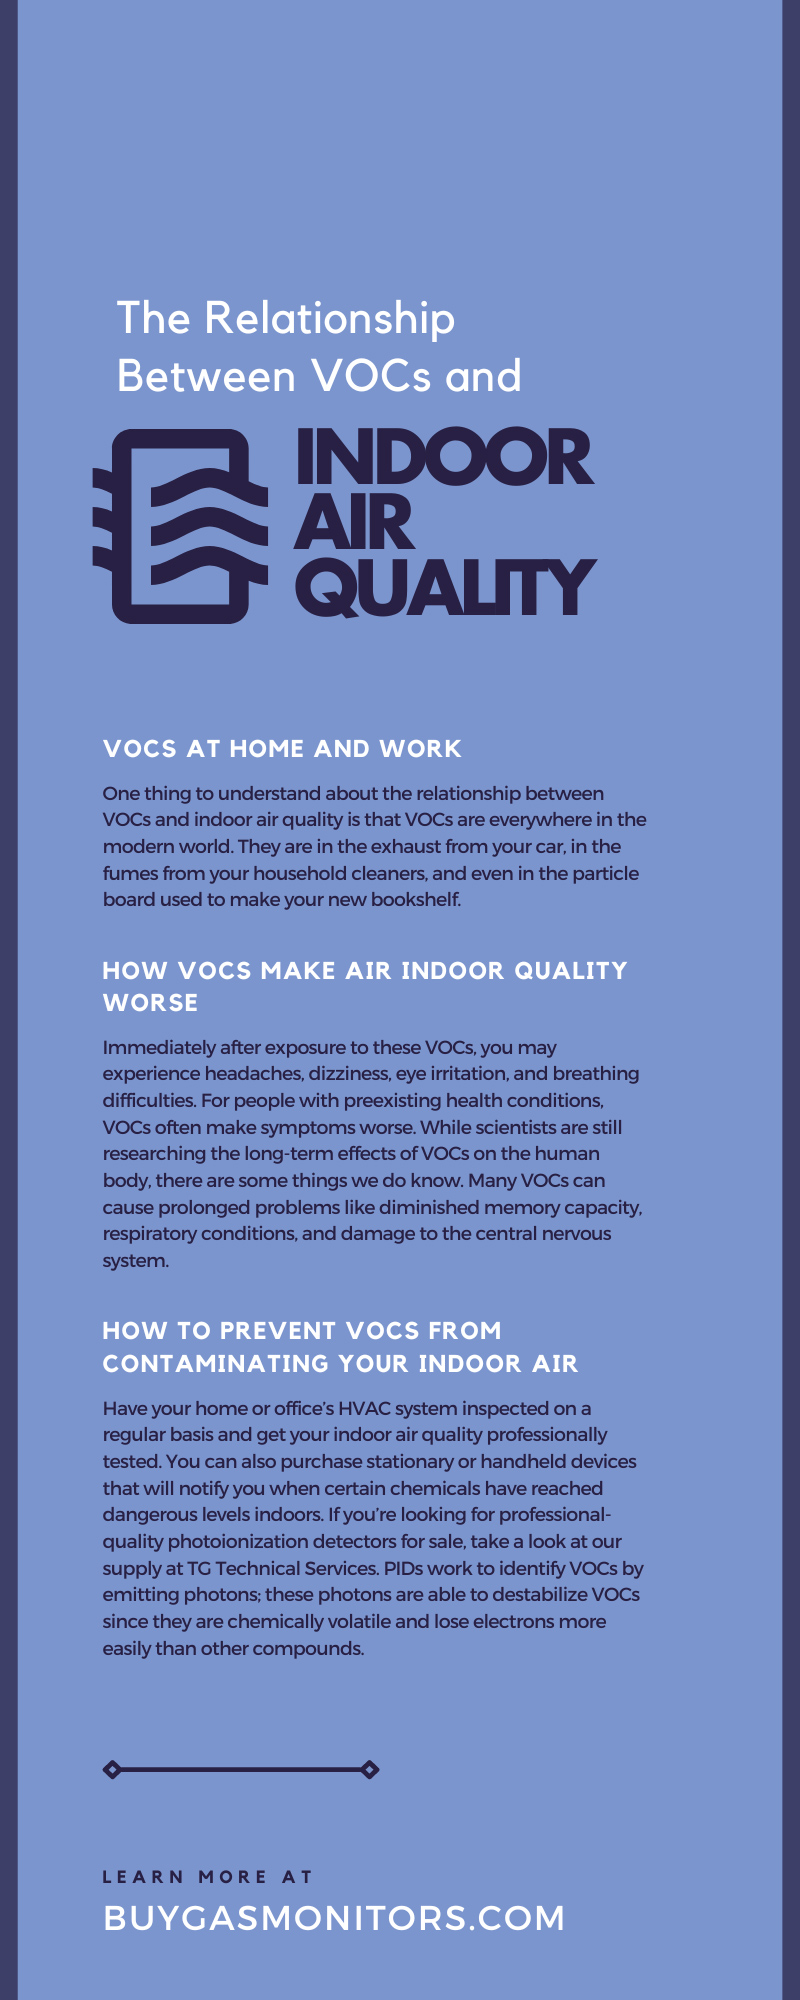 The Relationship Between VOCs and Indoor Air Quality